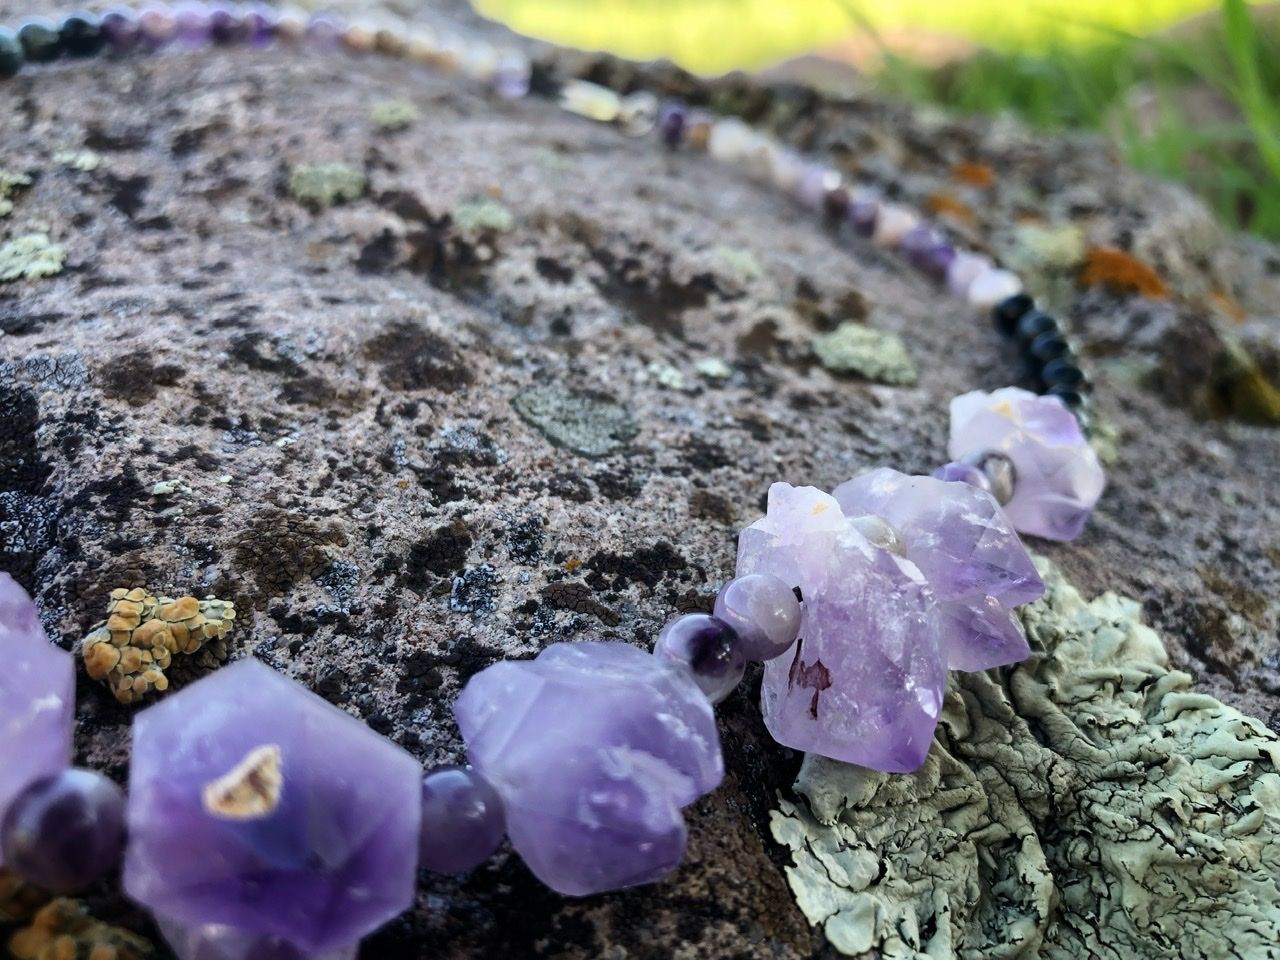 A purple amethyst crystal and black cats eye necklace rests on a lichen covered Boulder